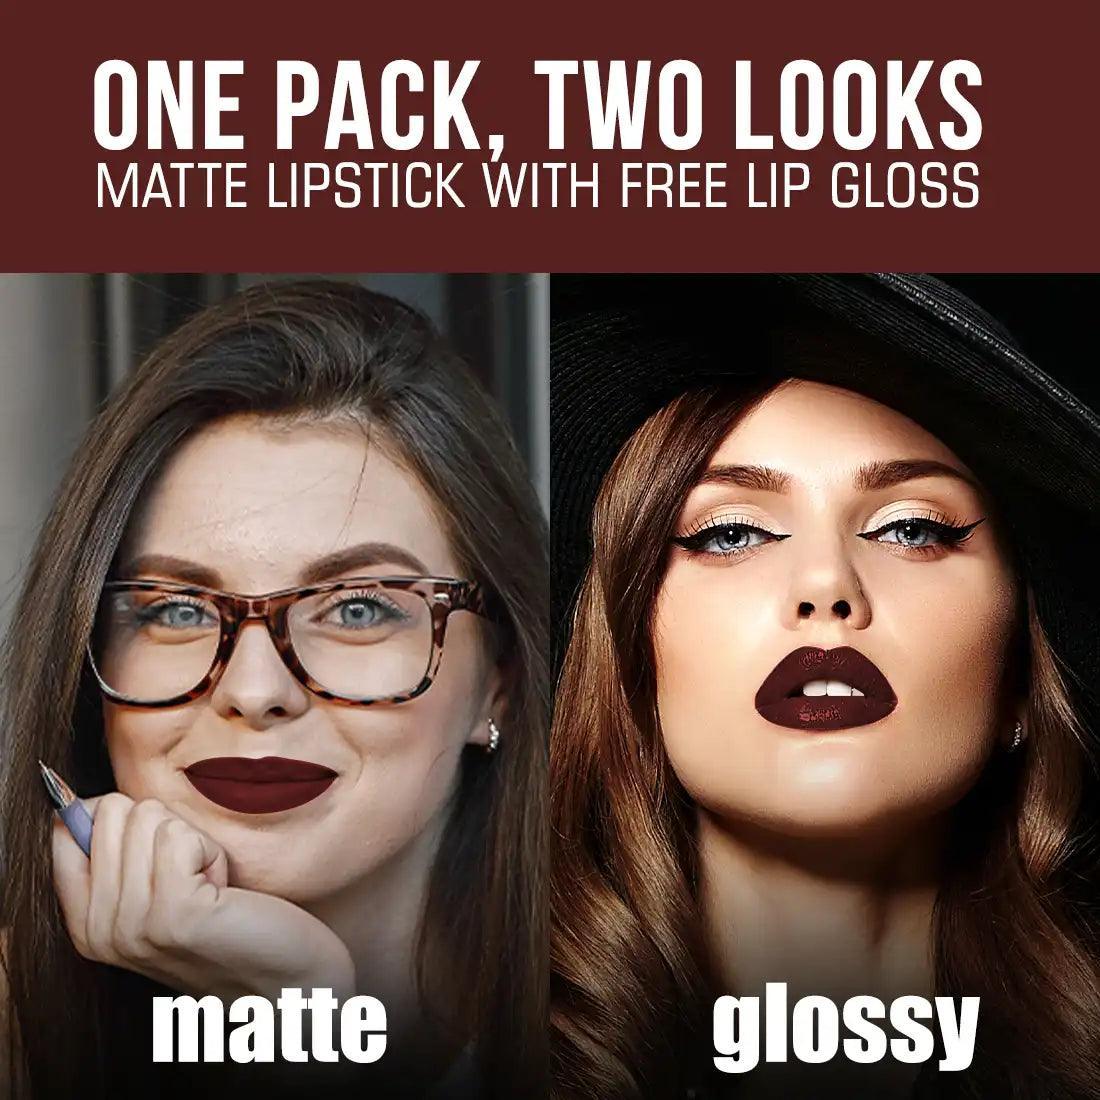 Get Two Looks In One Pack of NEUD Matte Liquid Lipstick Espresso Twist - Matte Finish For Daily Routine and Glossy Shine For Party Look - everteen-neud.com